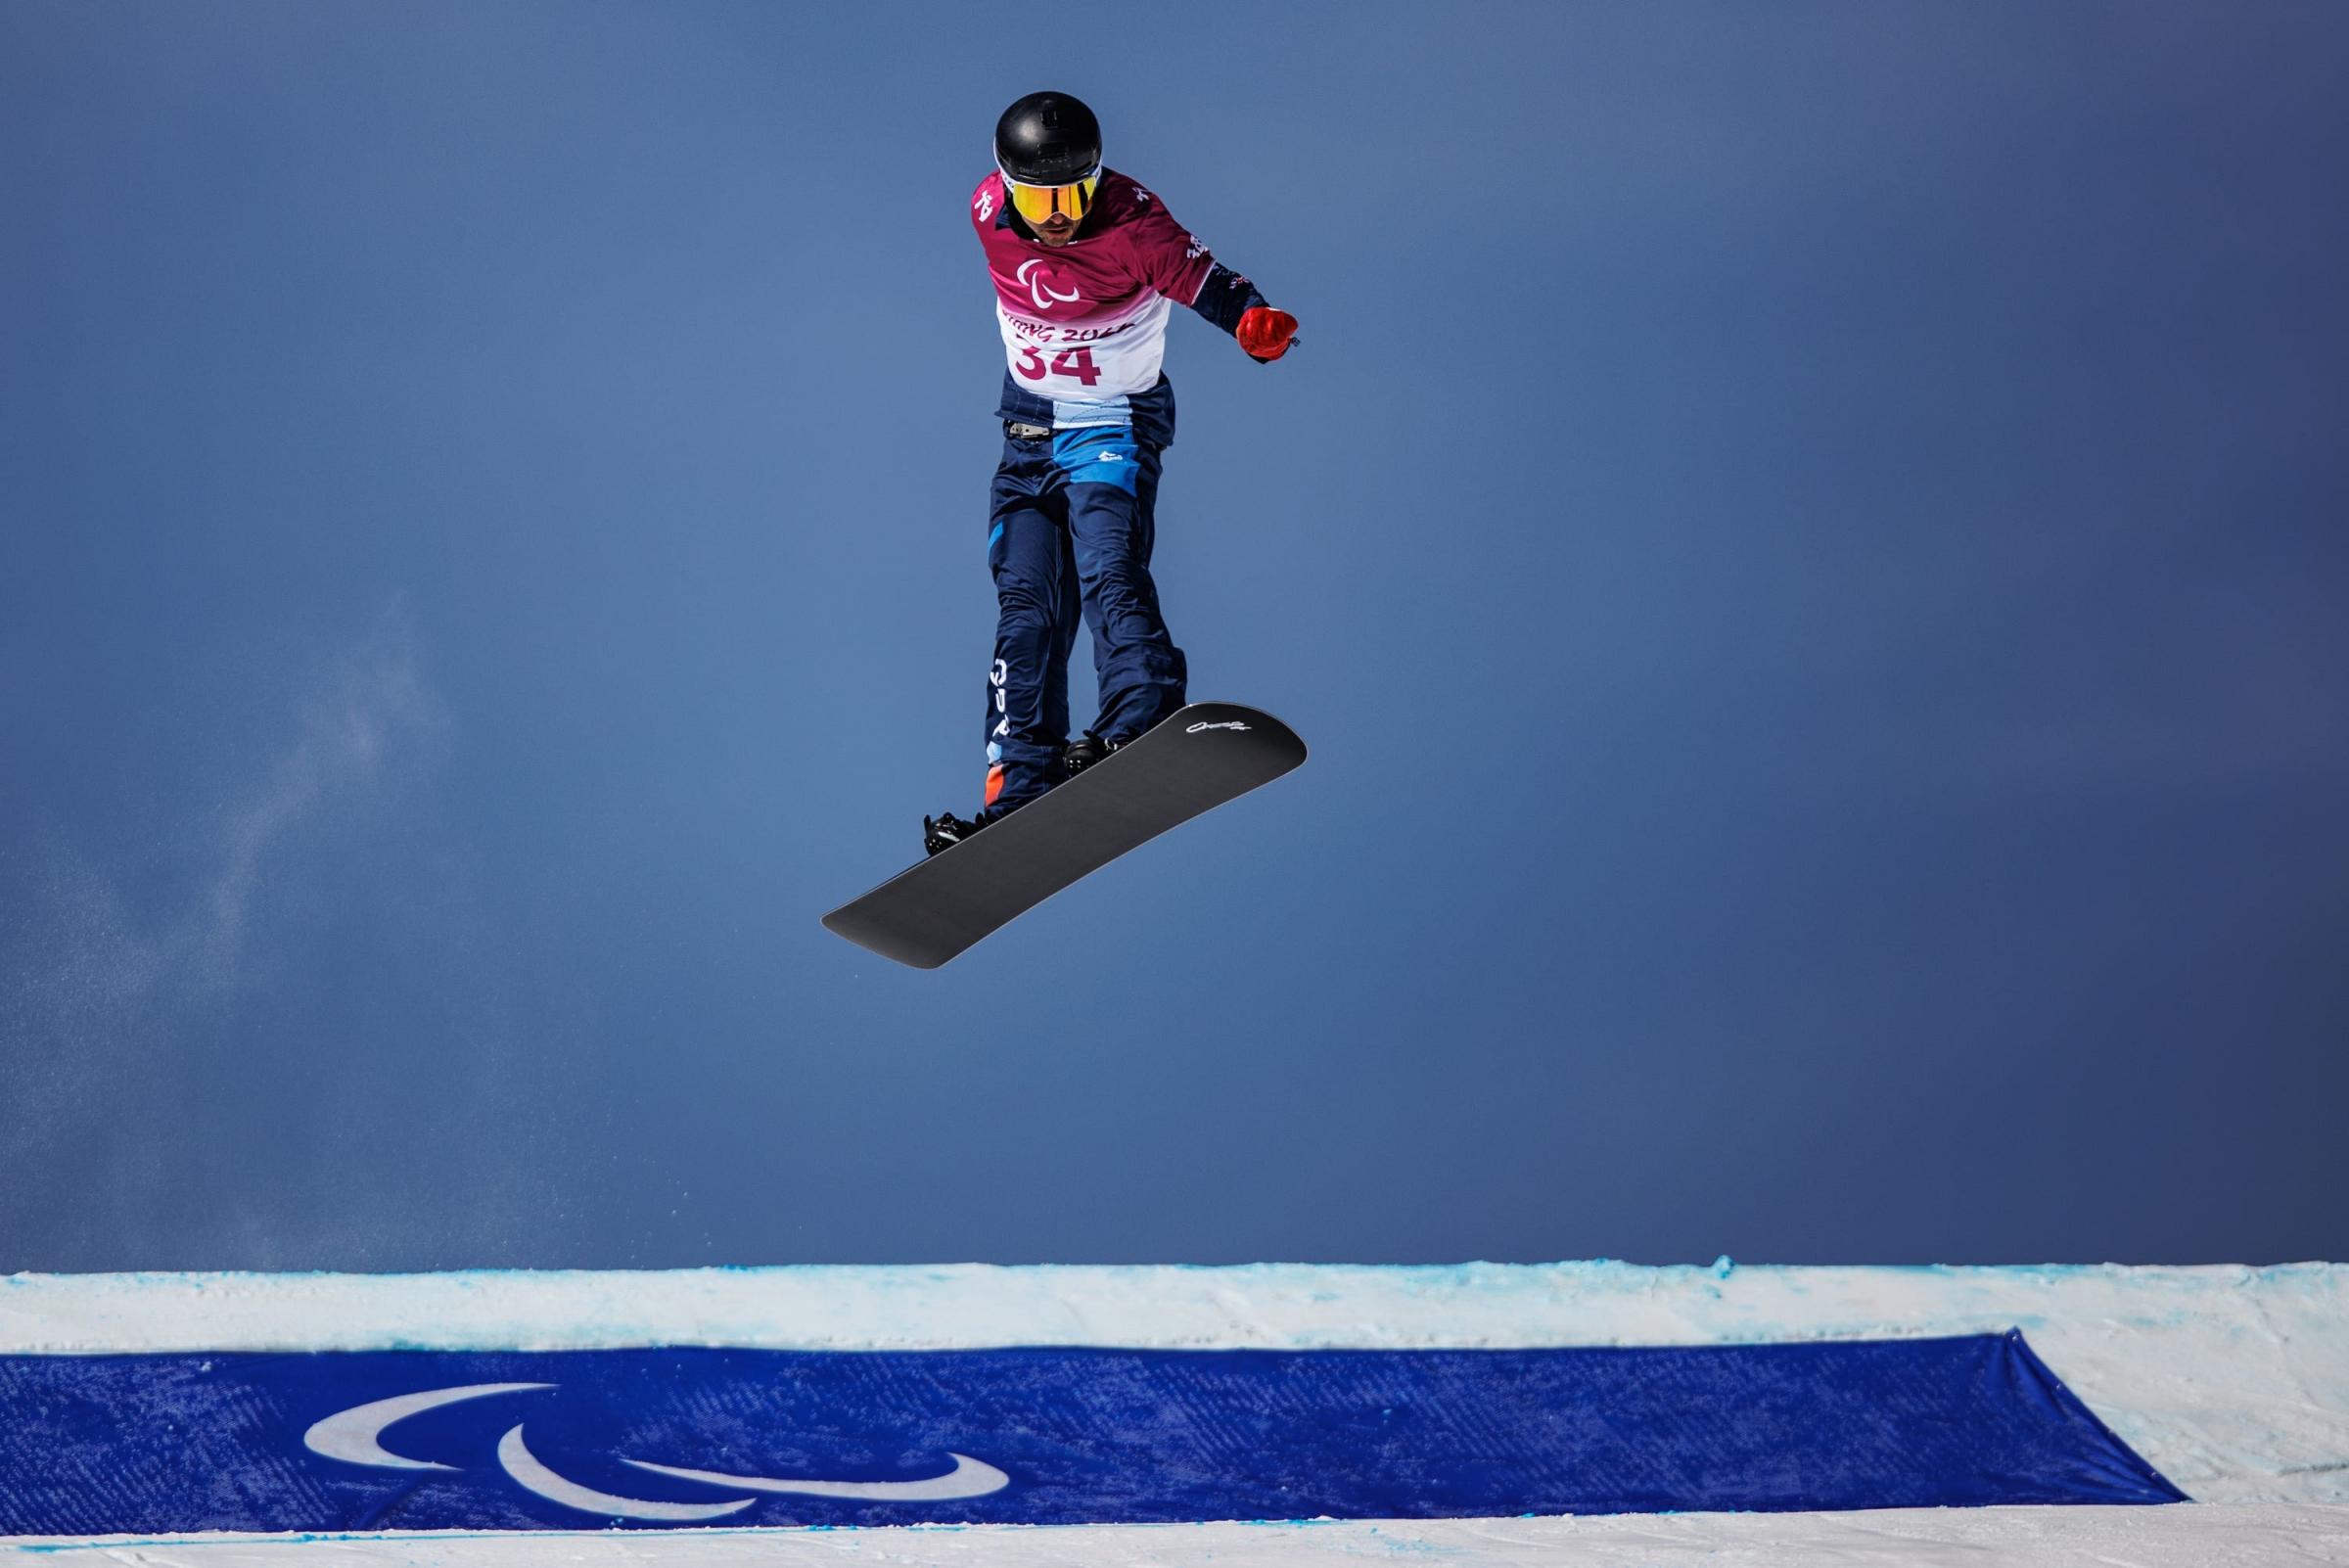 Ollie Hill won Britain’s first Paralympic snowboarding medal